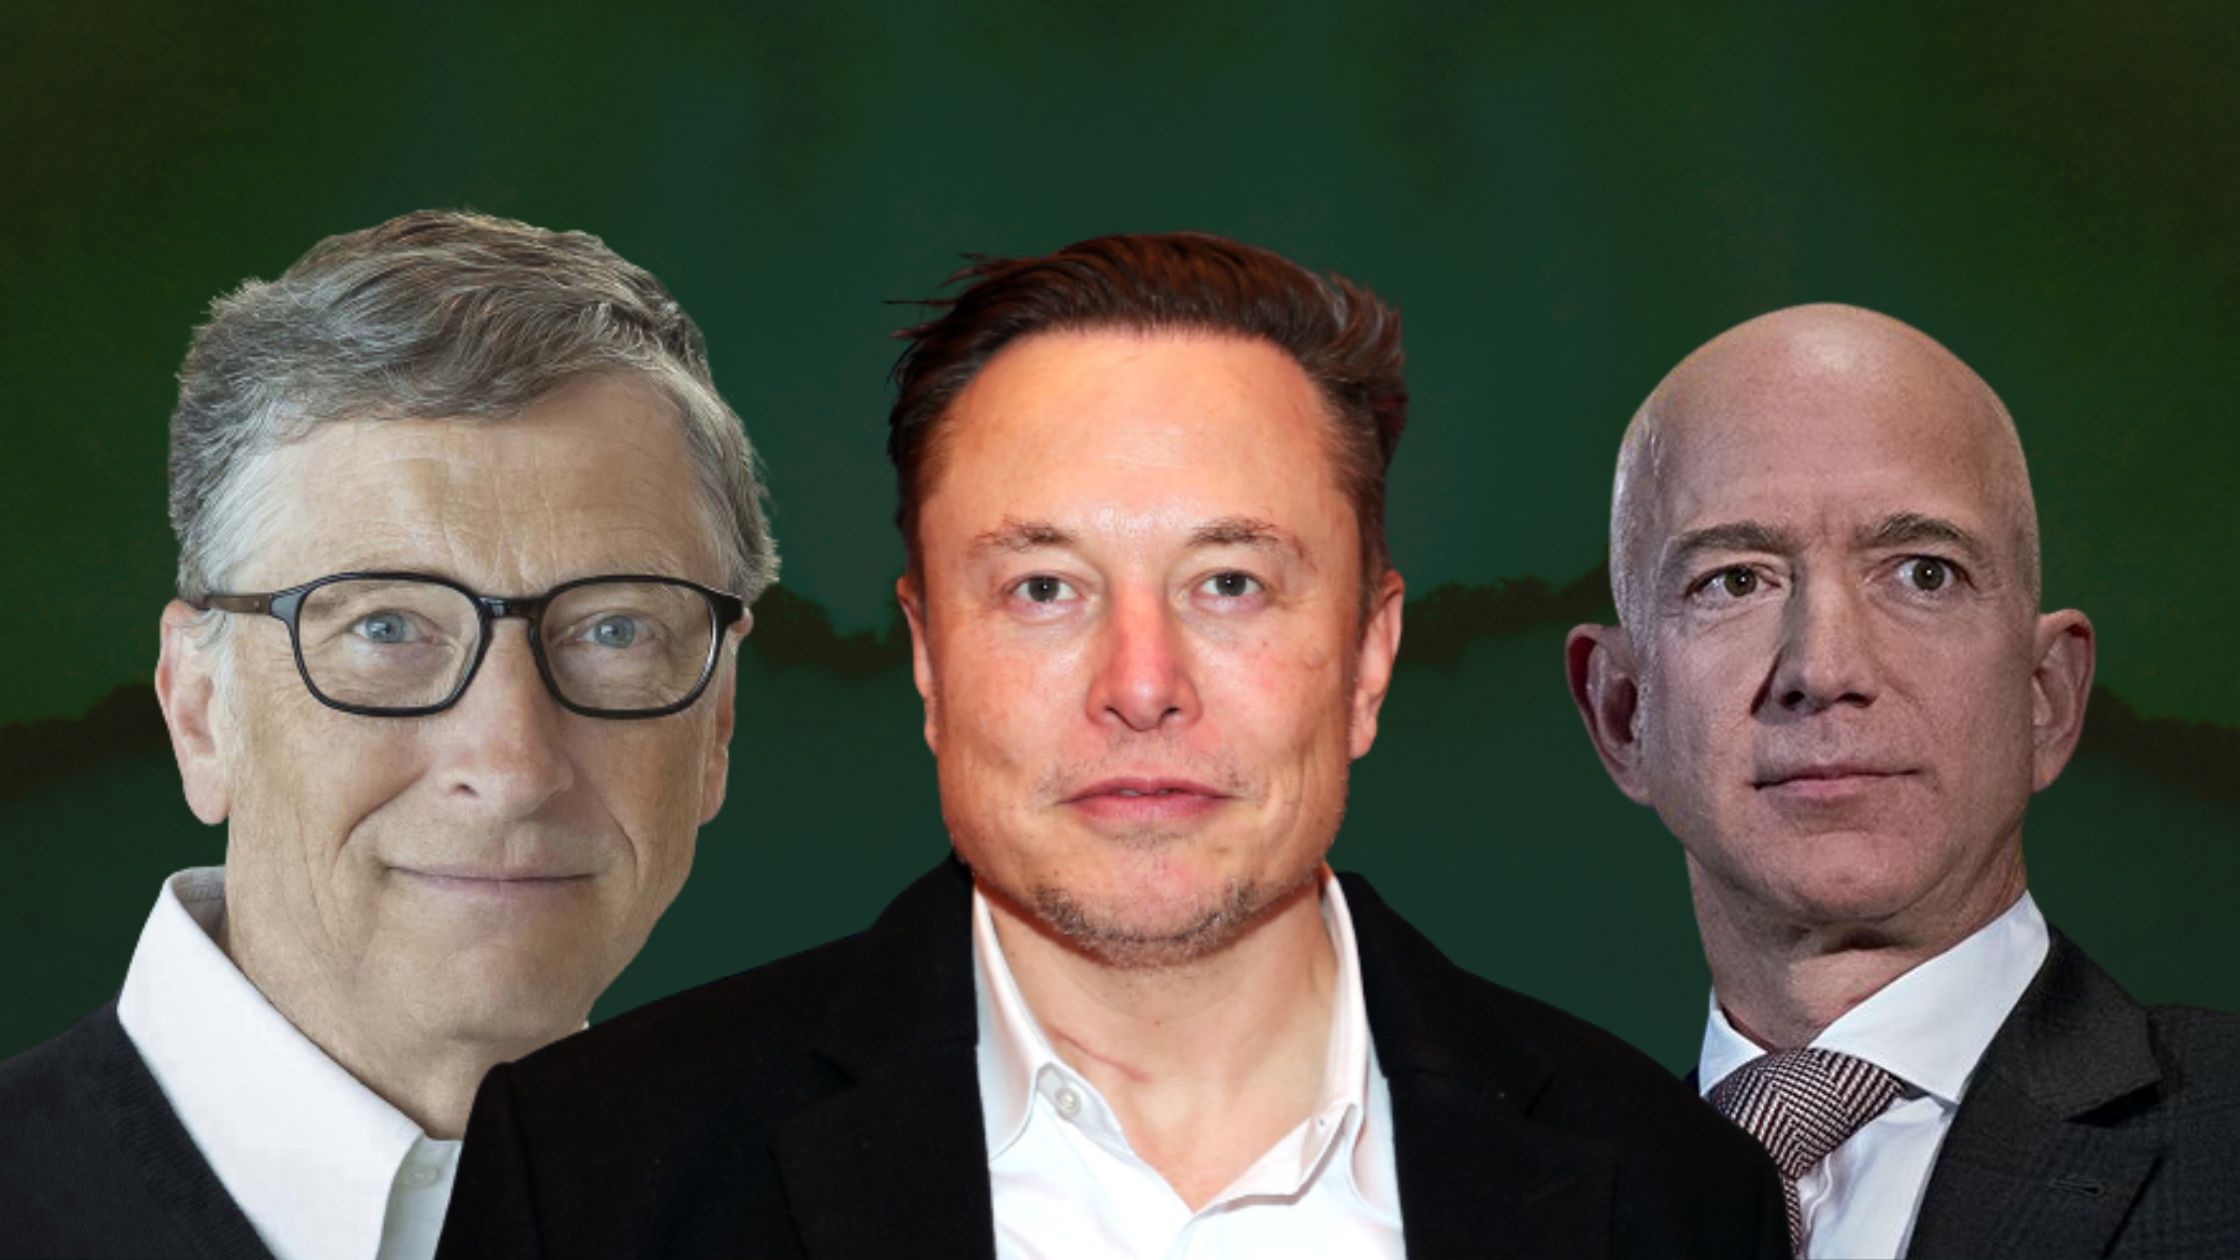 Top 10 Most Successful Entrepreneurs of All Time